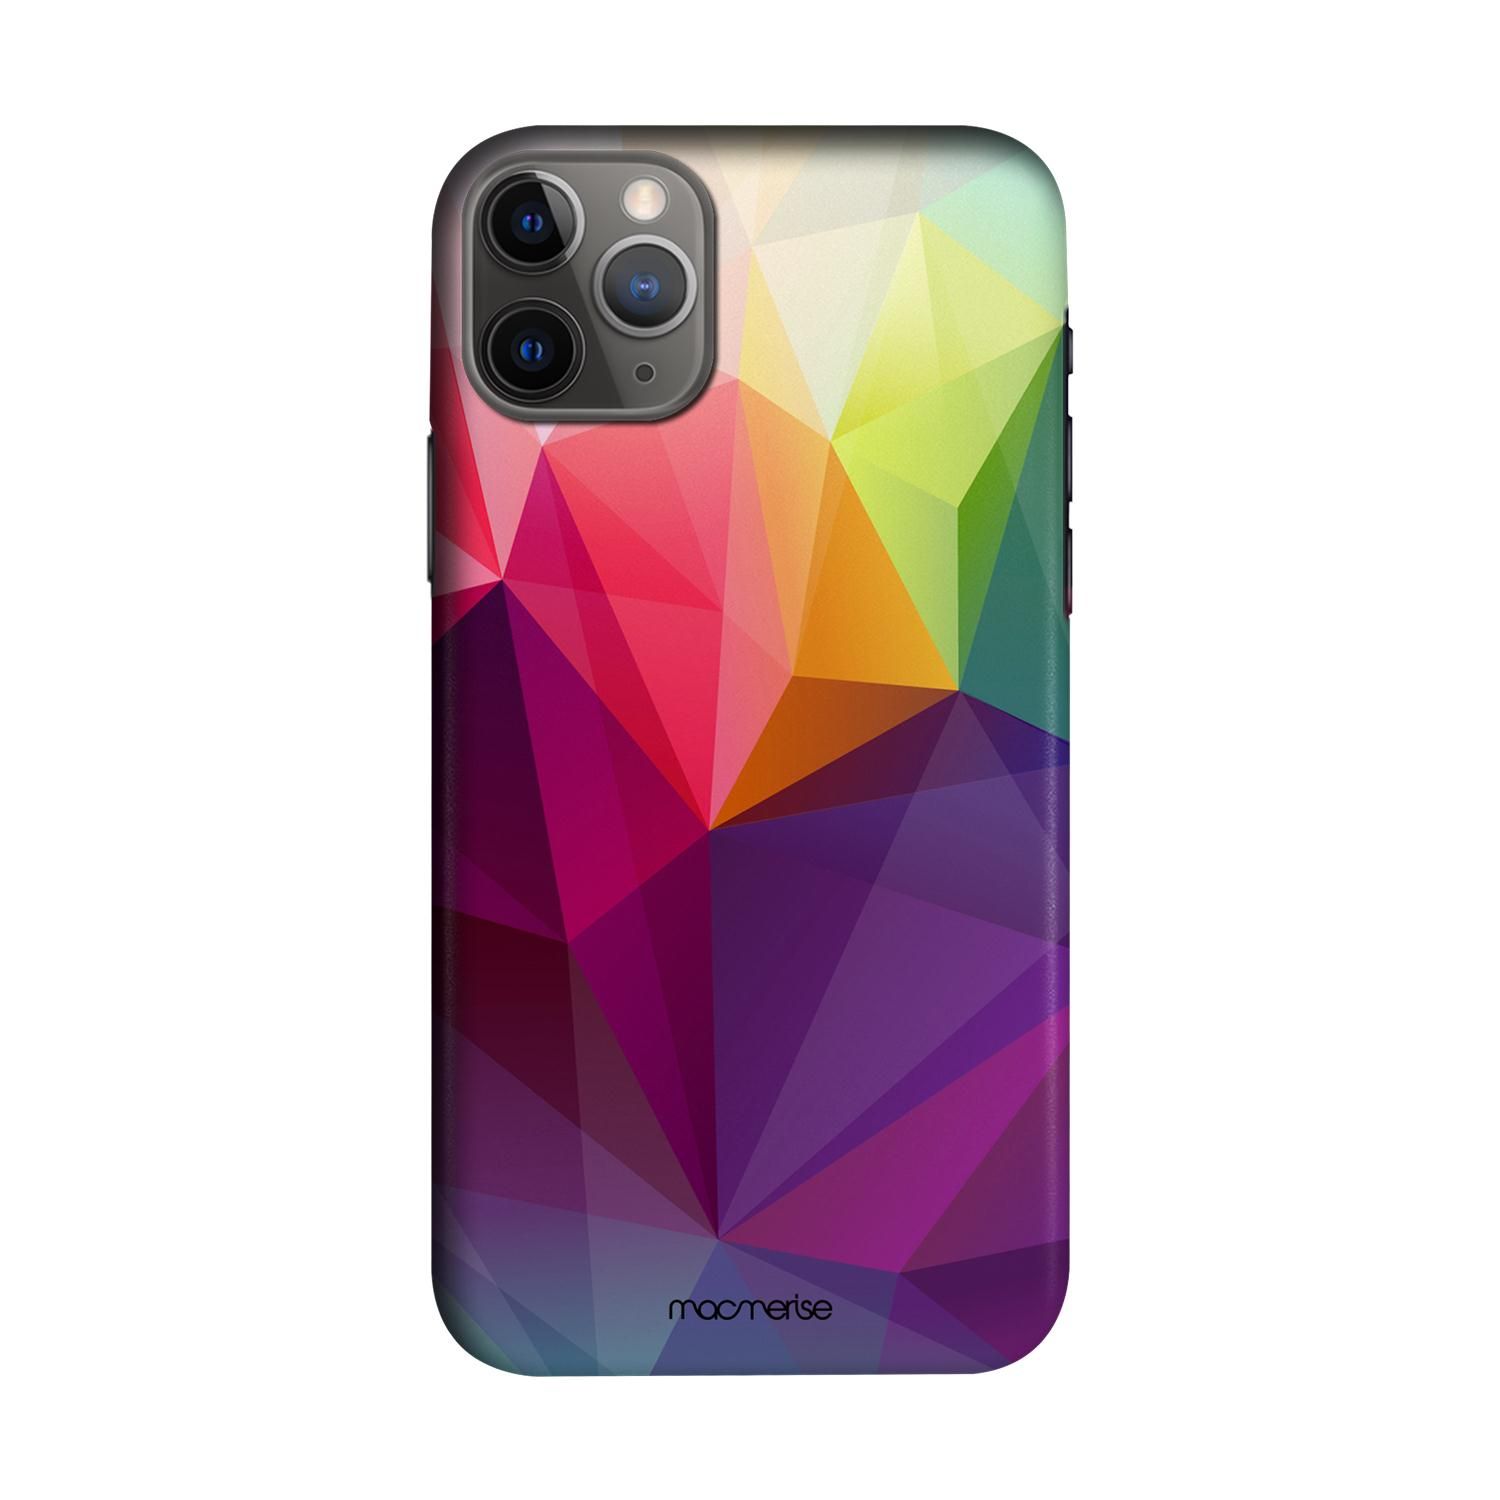 Buy Crystal Art - Sleek Phone Case for iPhone 11 Pro Max Online